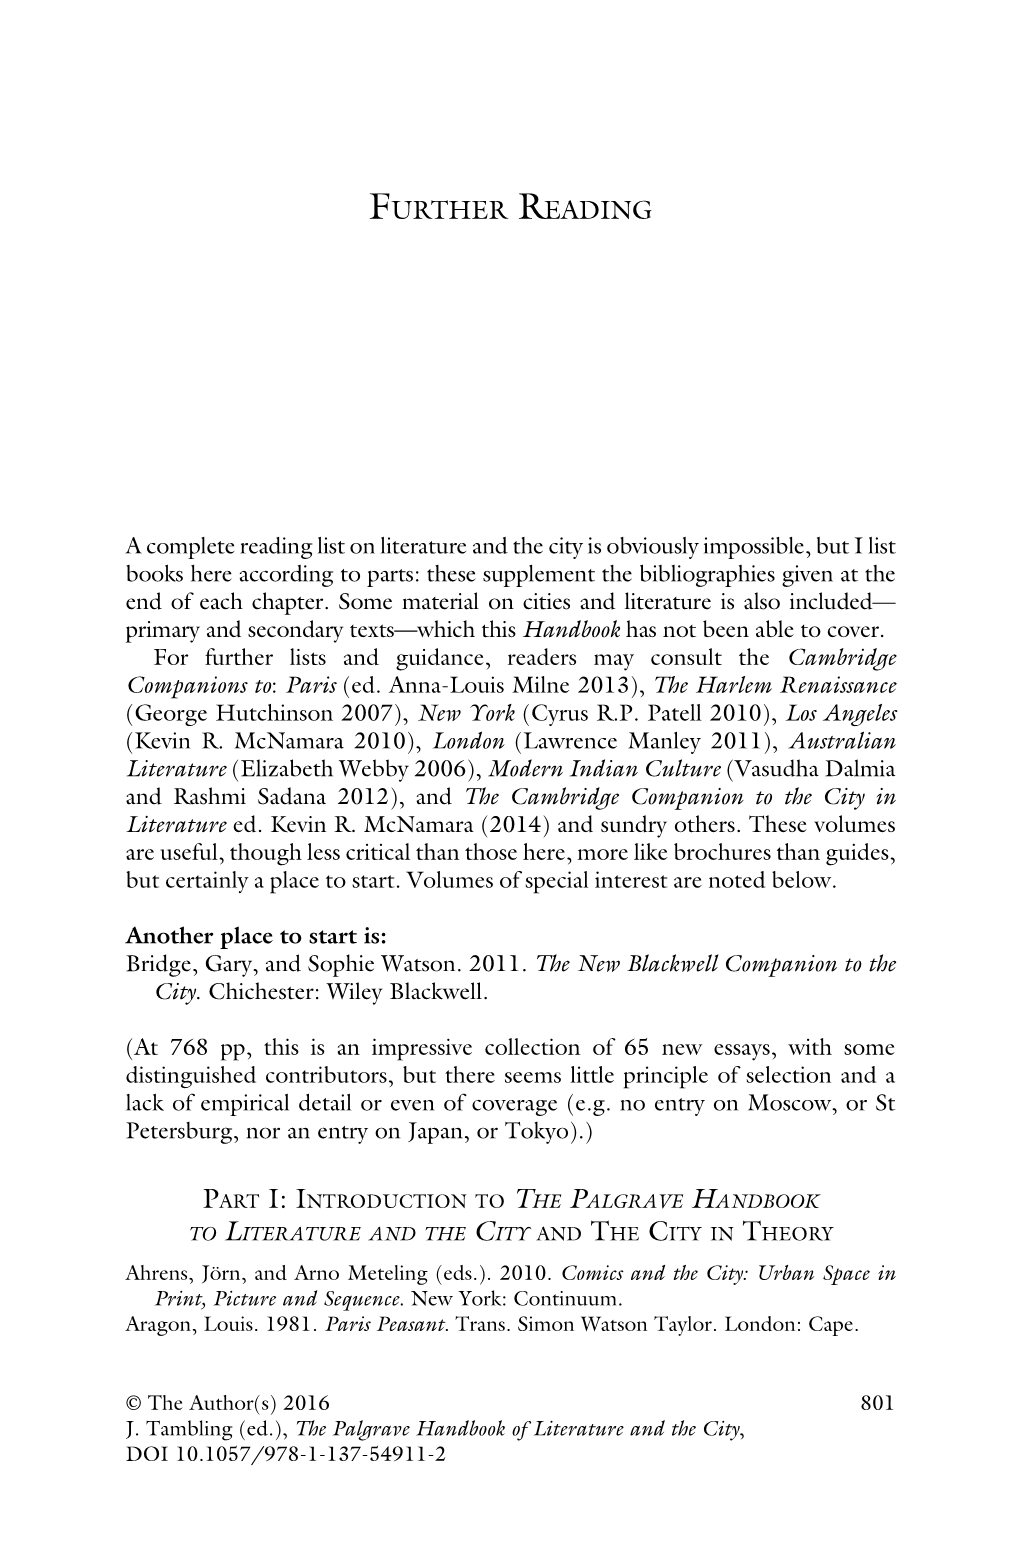 The Palgrave Handbook of Literature and the City, DOI 10.1057/978-1-137-54911-2 802 FURTHER READING